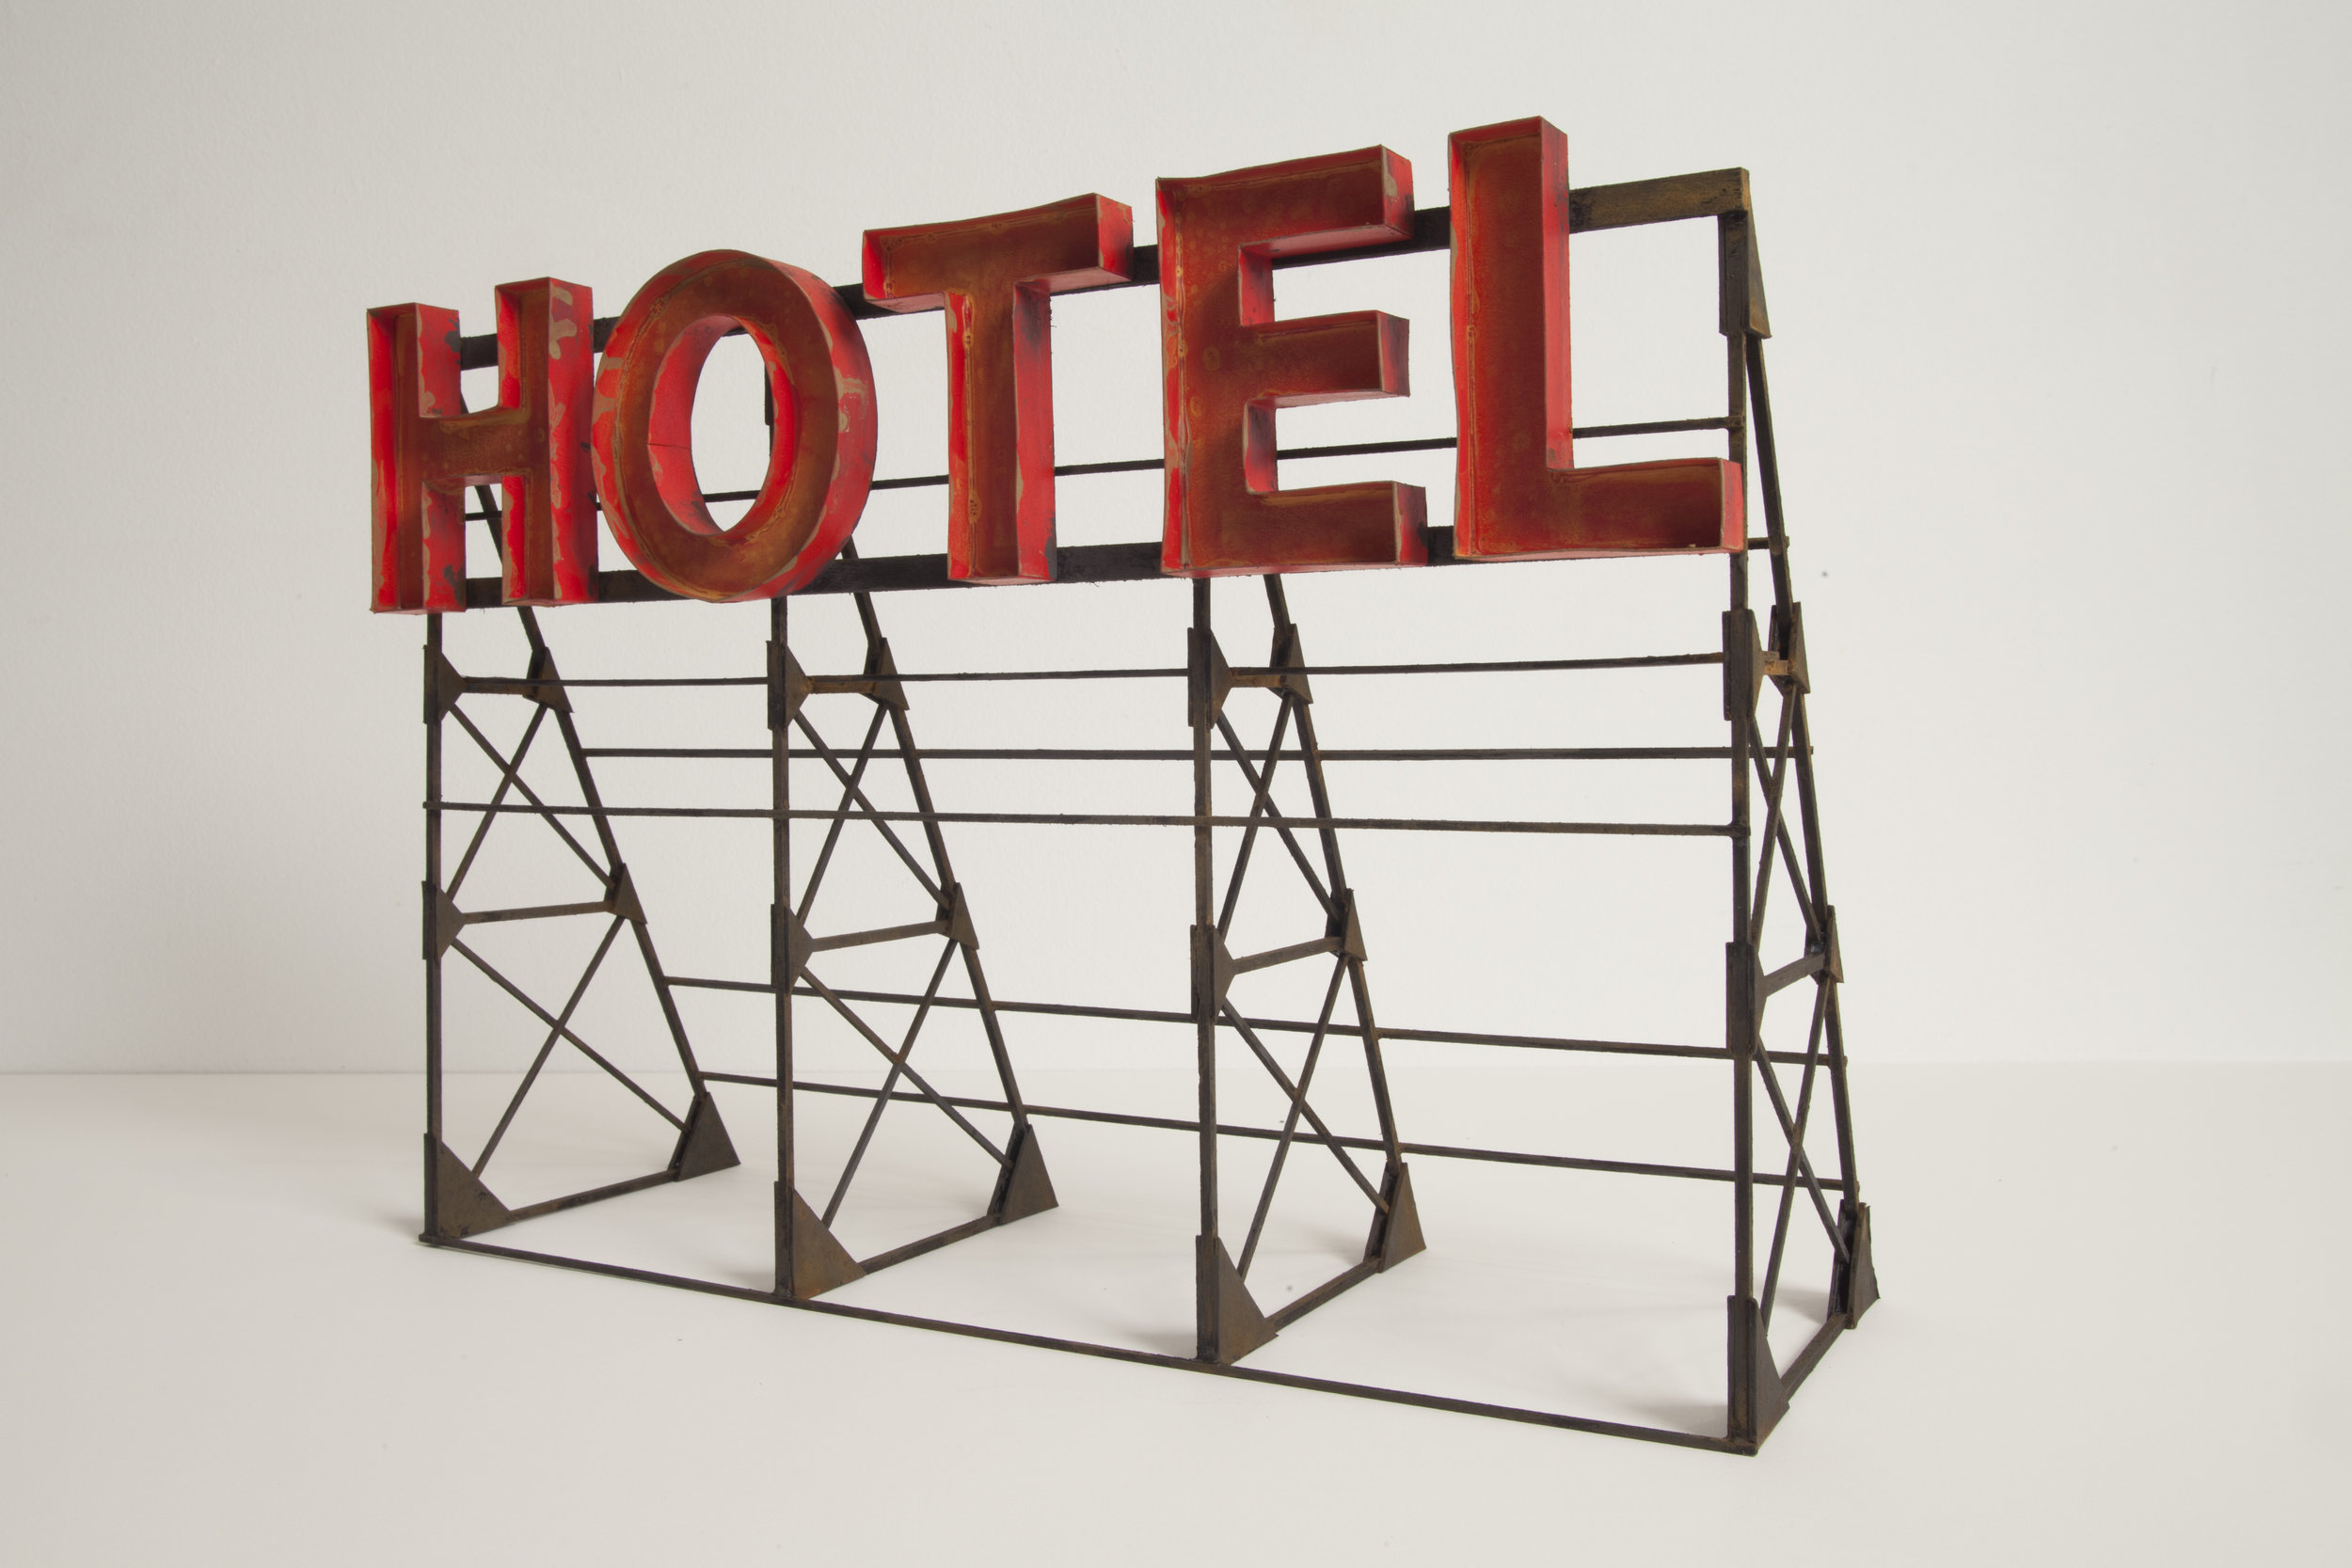 Hotel (Red) - SOLD